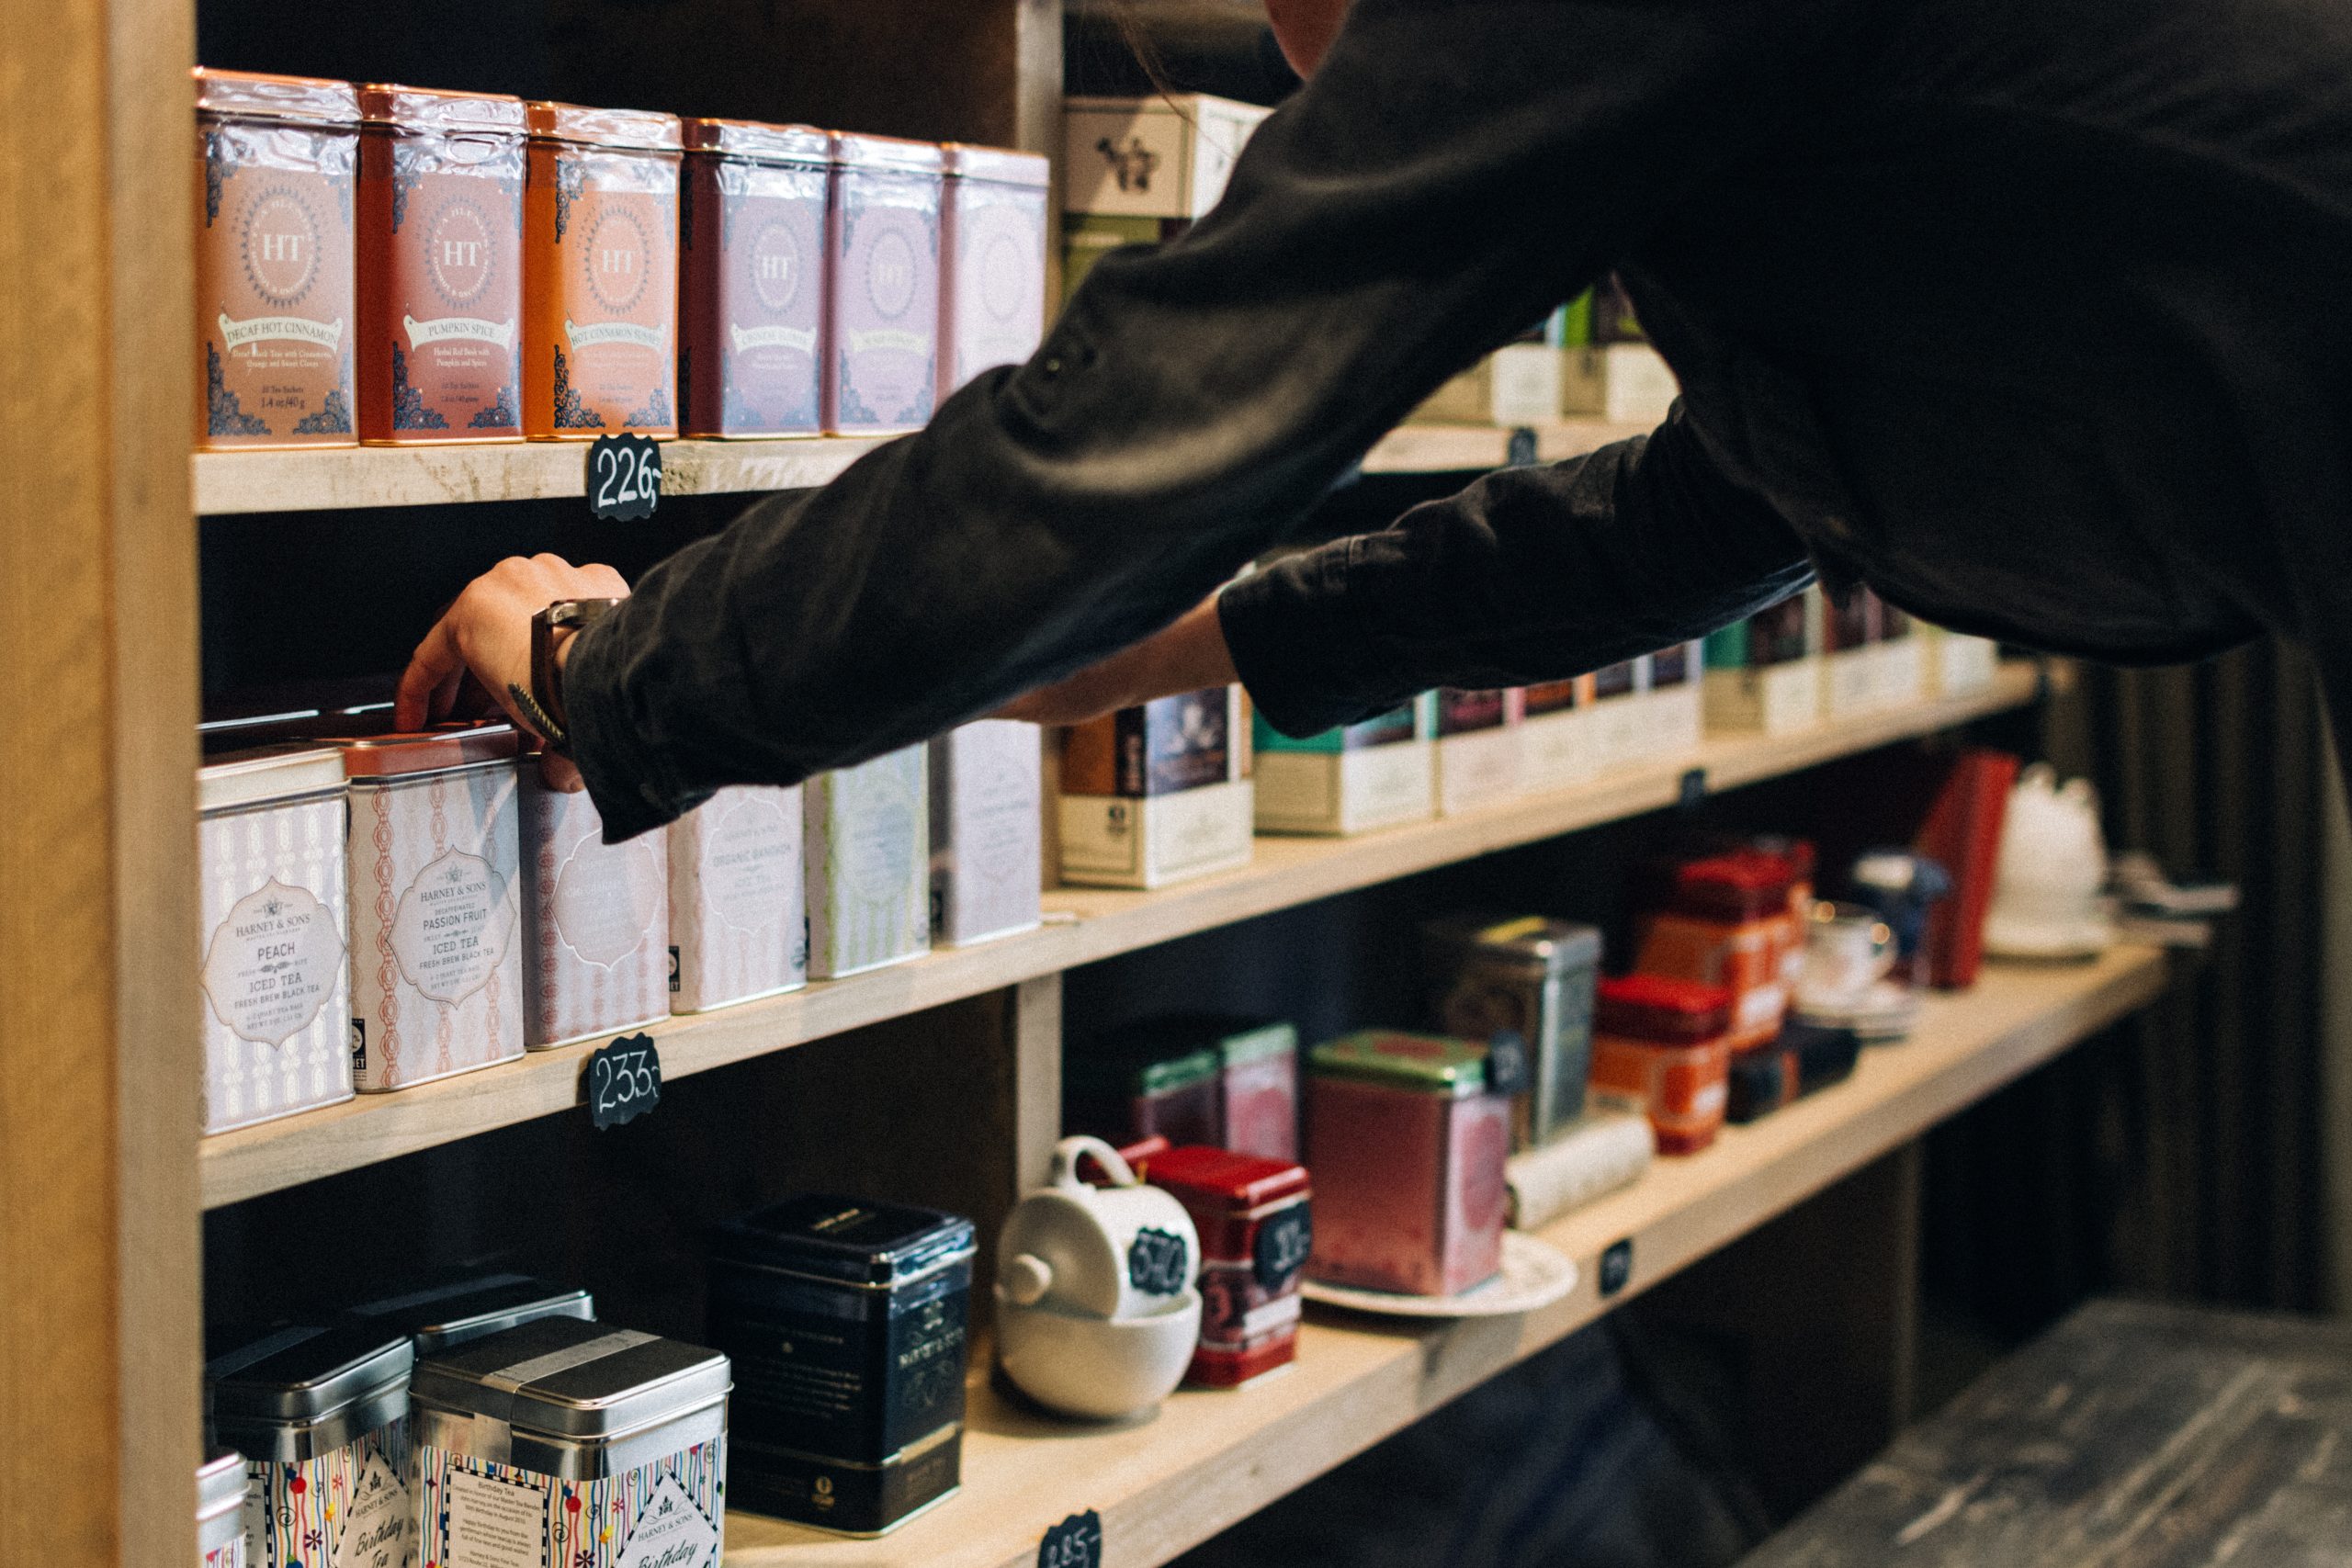 A shopper reaches for a box of tea on a shelf stacked with an assortment of different teas.